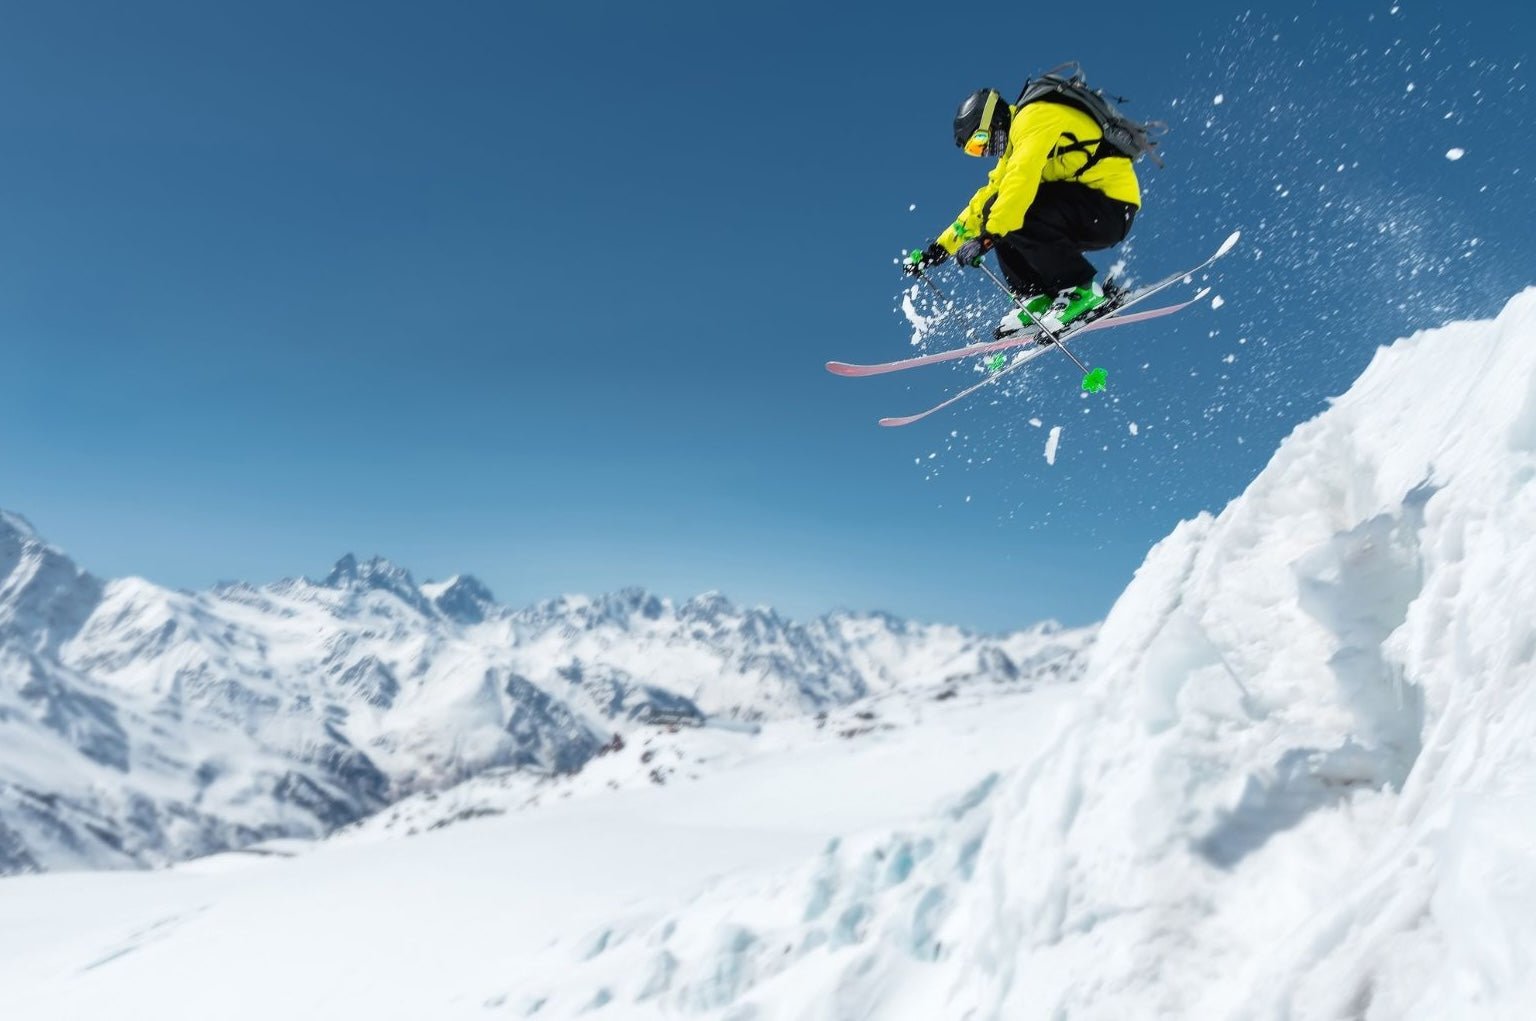 Backcountry vs. resort skiing: Pros and Cons - snowfeet*